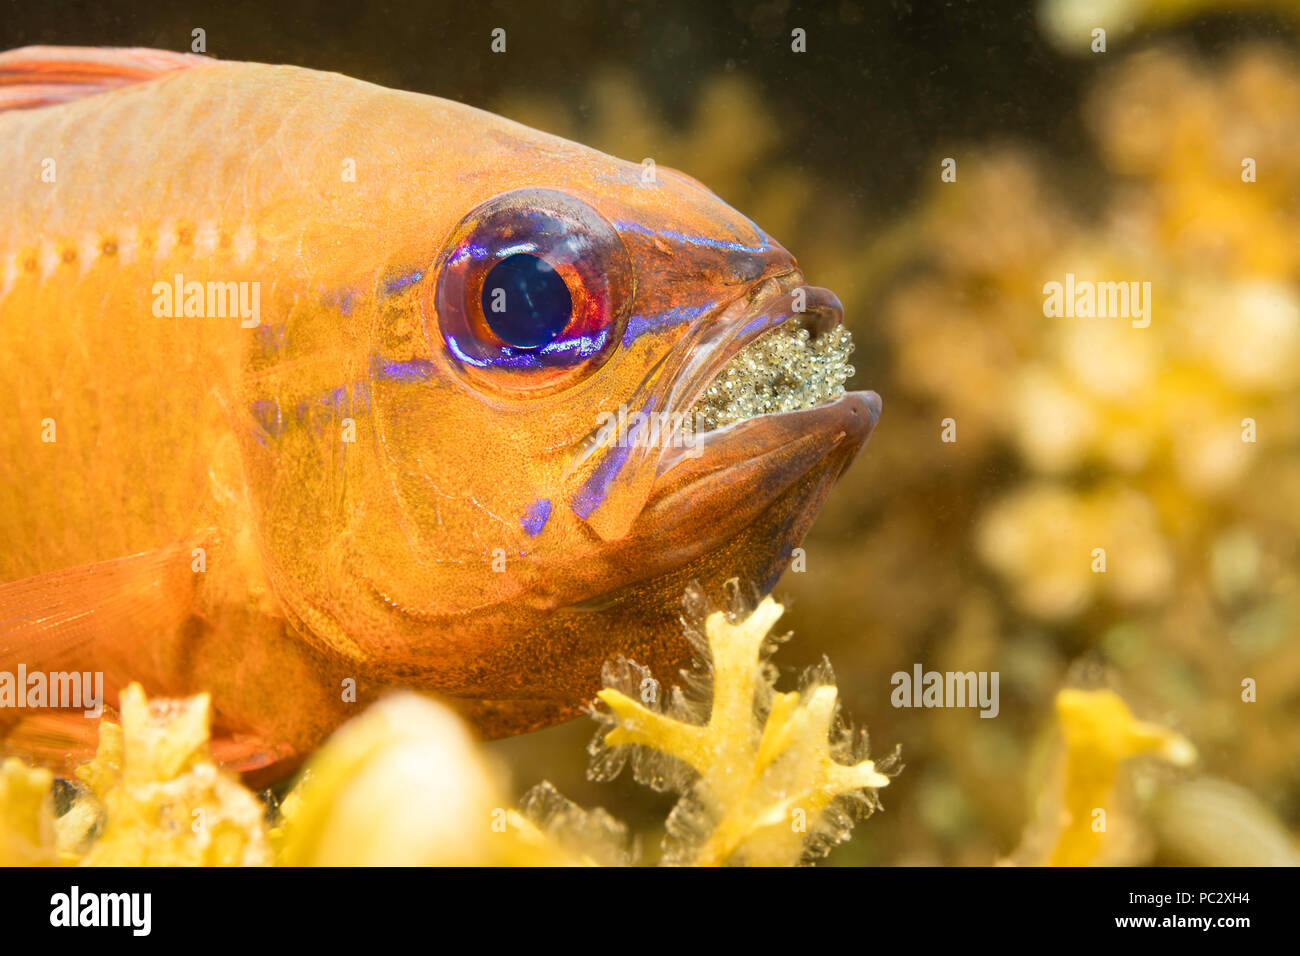 This male ring-tailed cardinalfish, Ostorhinchus aureus, is protecting and incubating its eggs by carrying them in his mouth, Philippines. Stock Photo